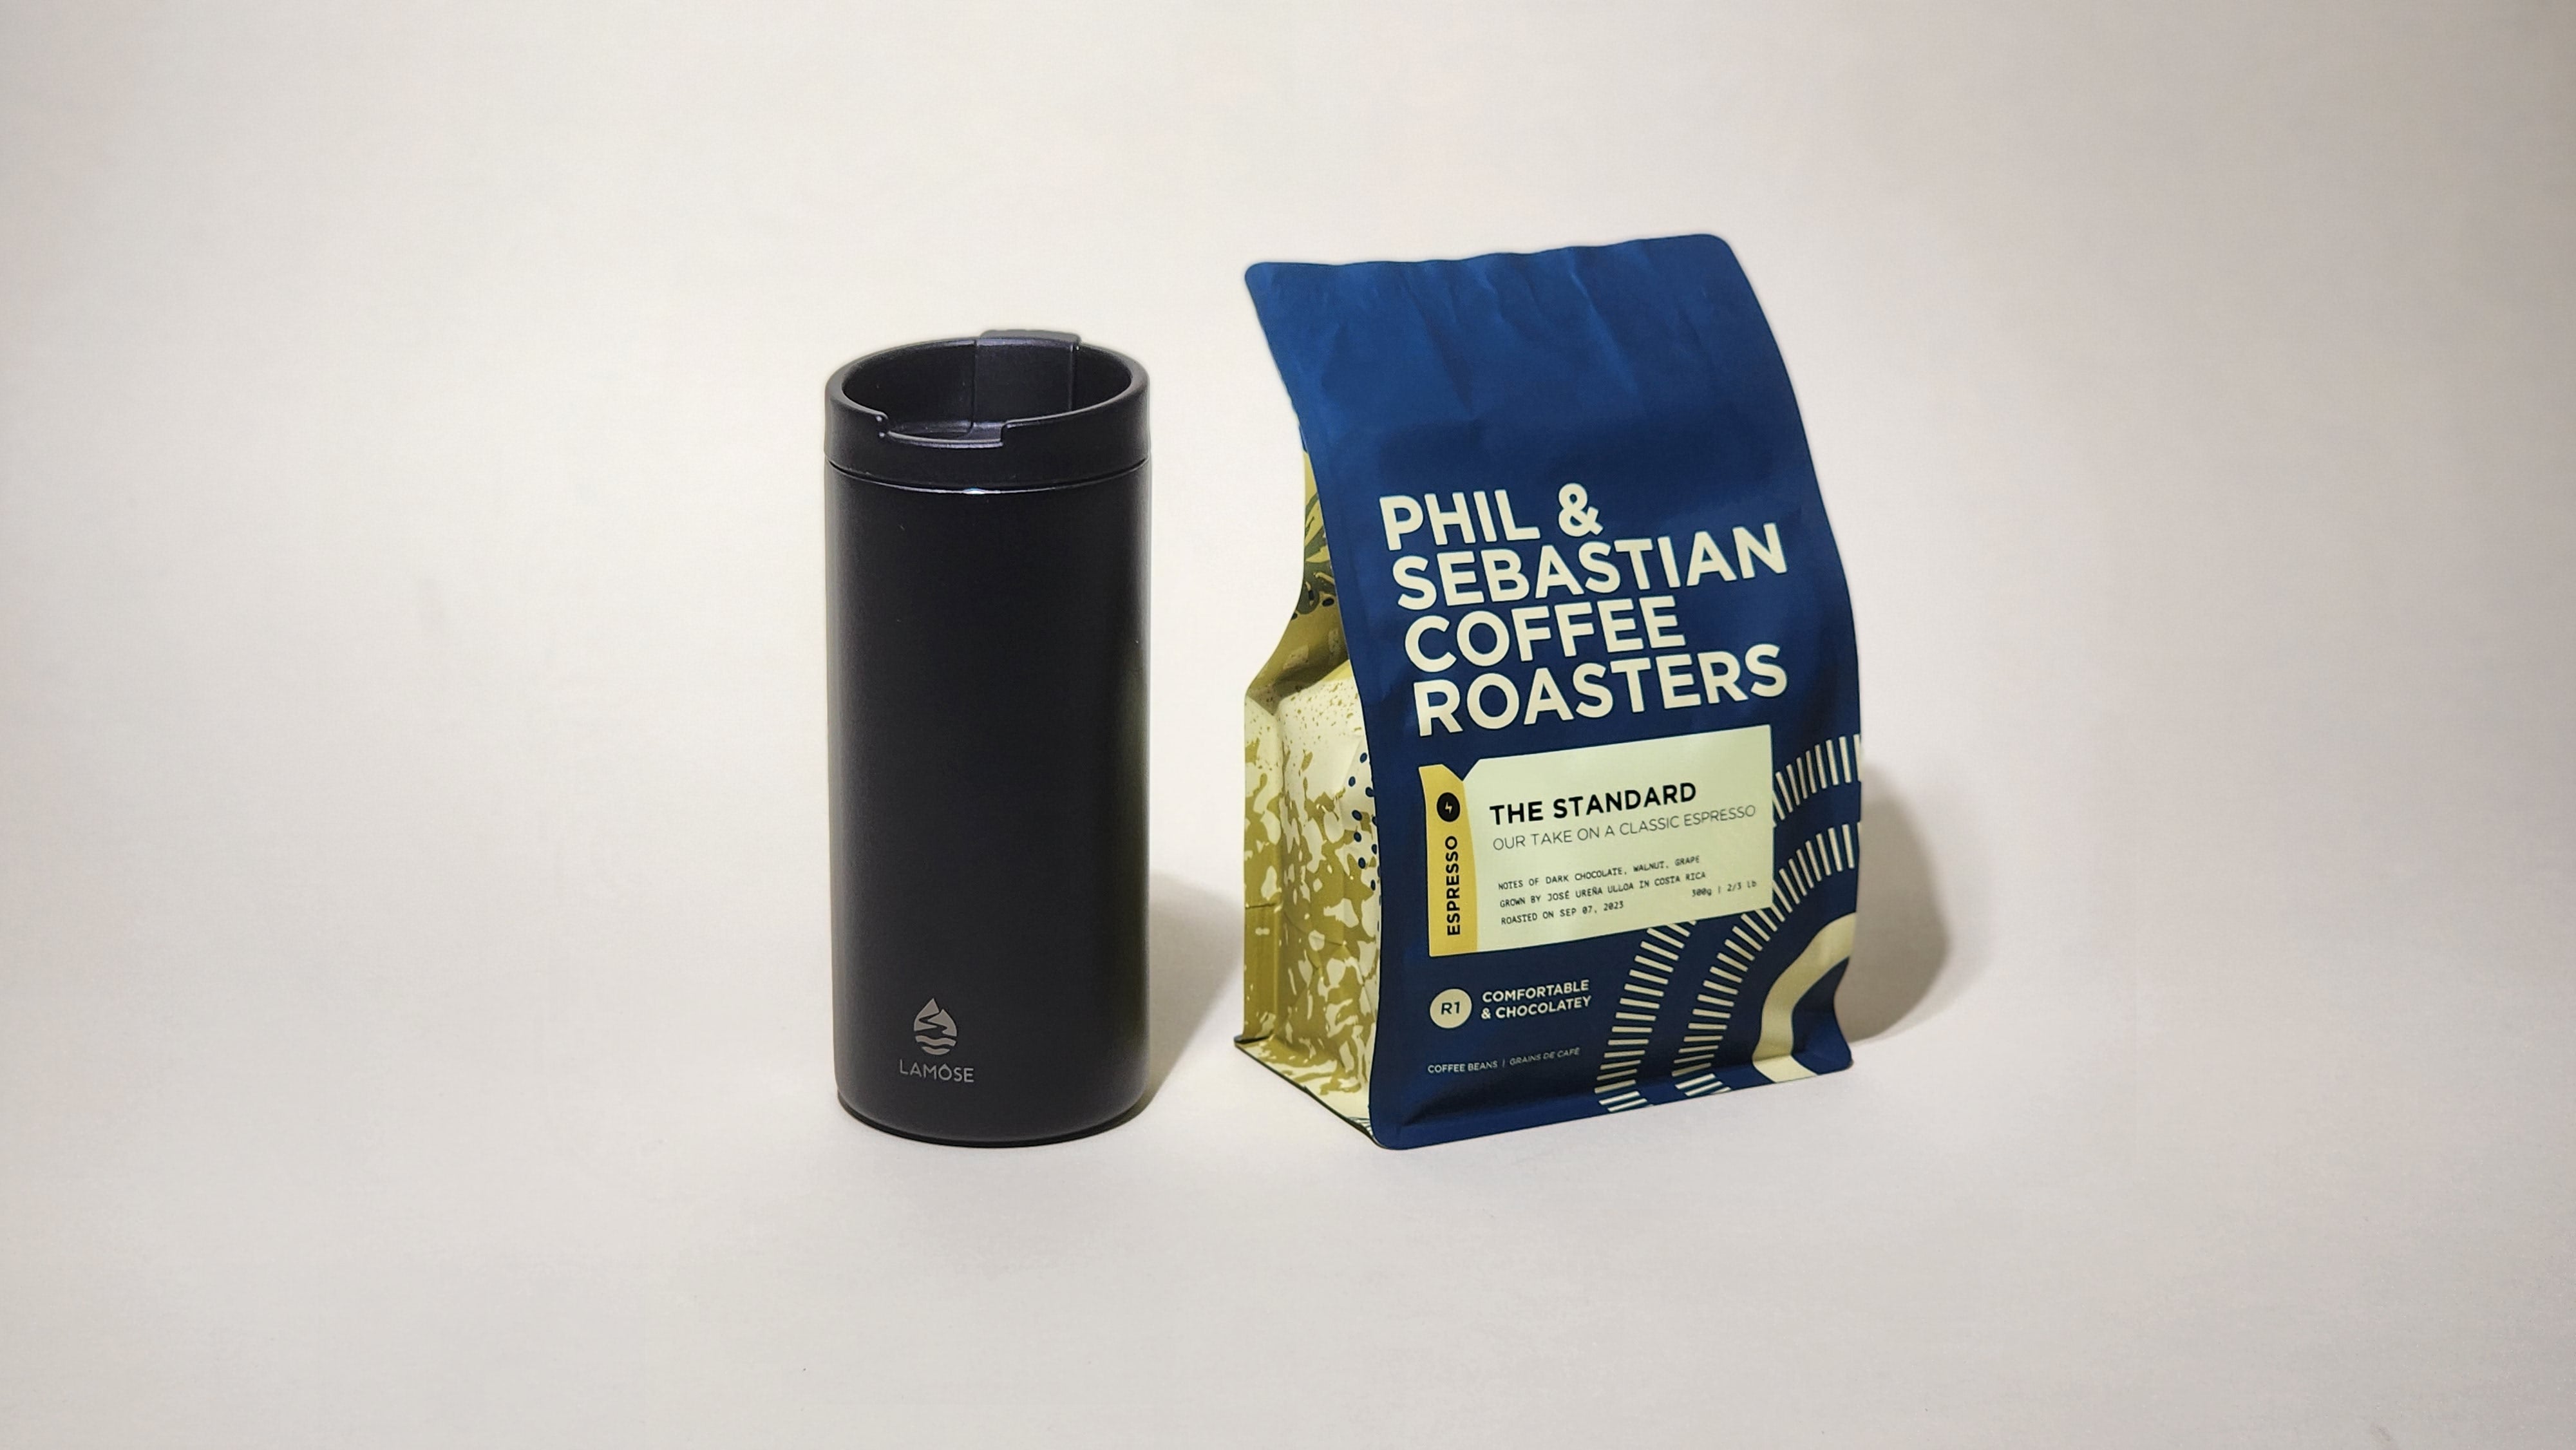 Phil & Sebastian Coffee Roasters' Standard Espresso. Consistent flavor profile with sweet, chocolatey, and nutty notes. Sourced from individual farms and co-ops. Brew with parameters optimized for espresso excellence.